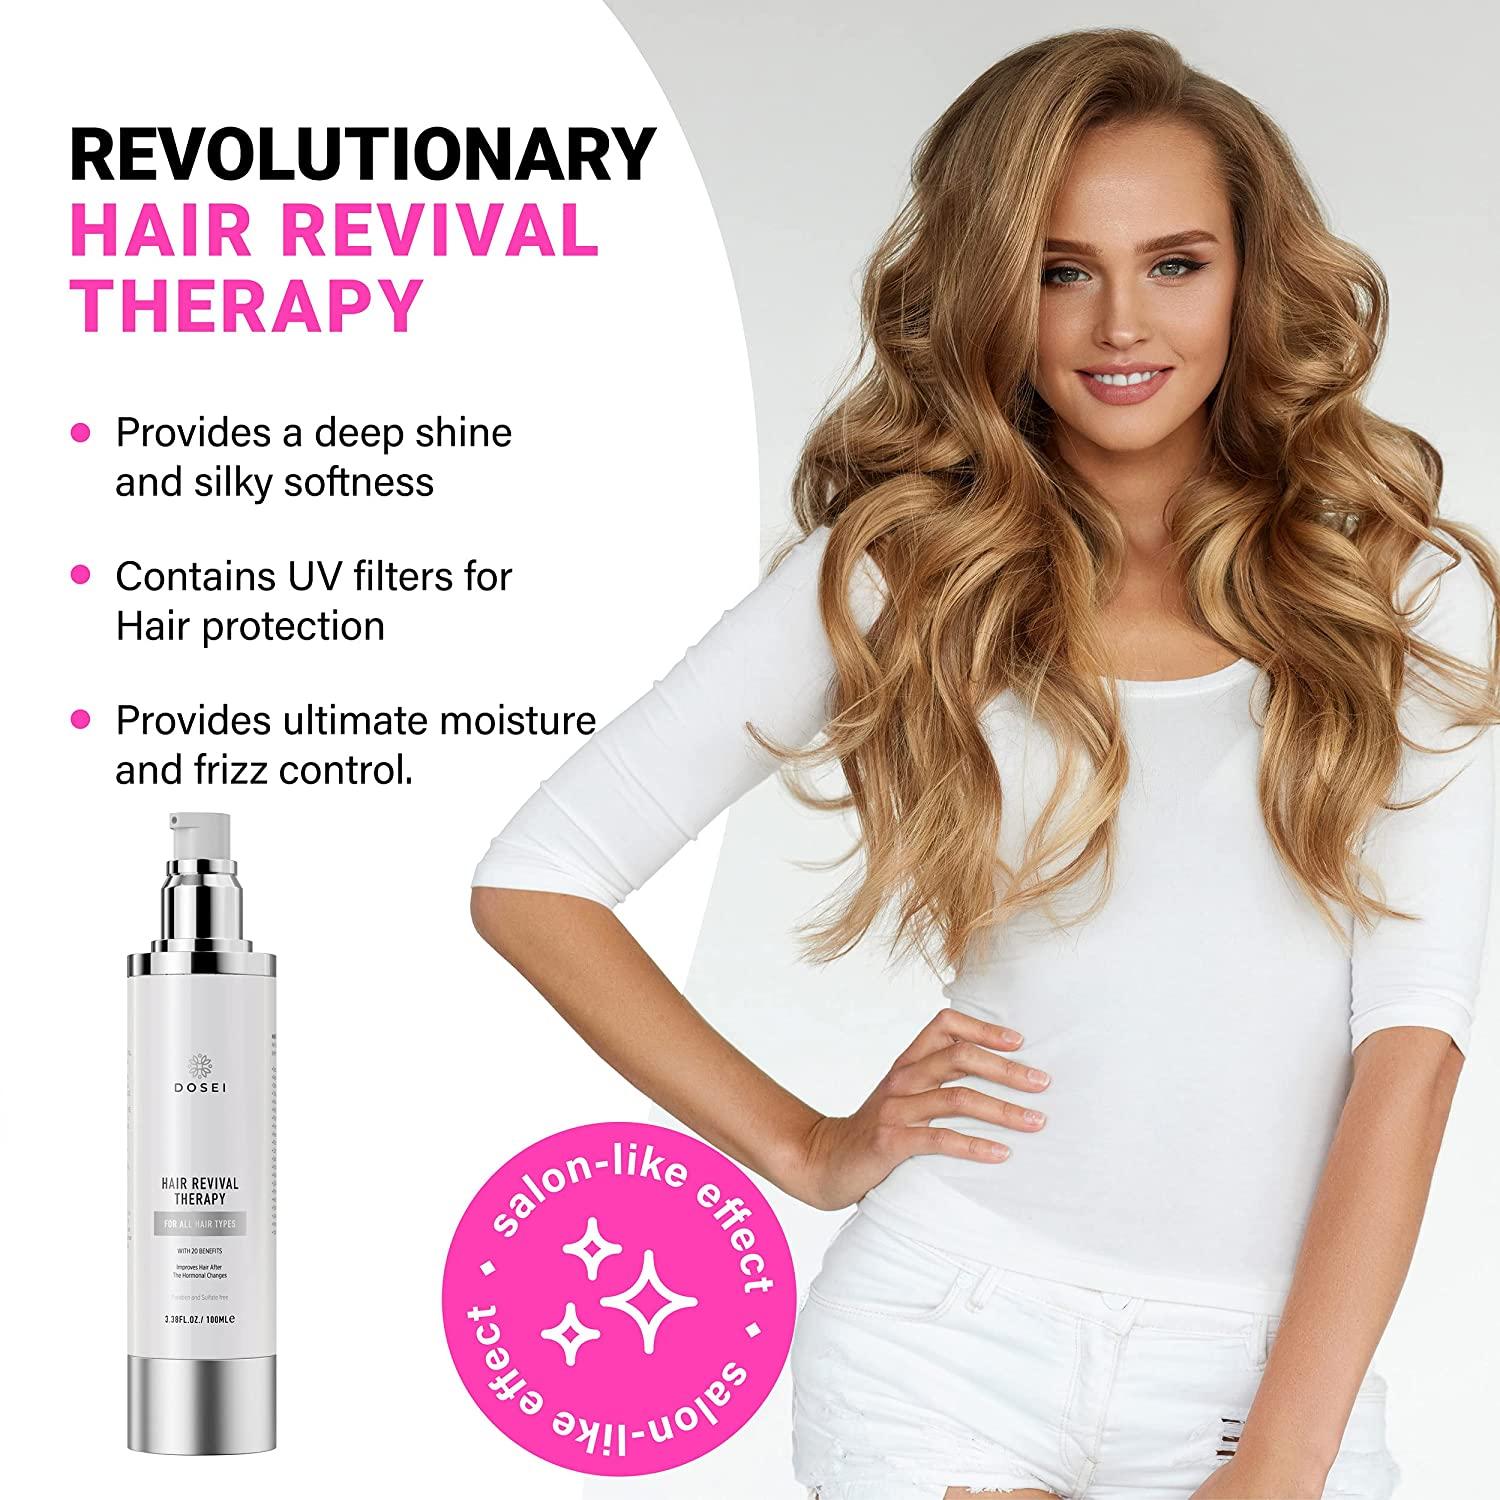 Damaged Hair Treatment Repairing - Split Ends Hair Treatment, Smoothing Hair  Serum for Frizzy and Damaged Hair, Leave in Conditioner Treatment for Glossy,  Silky, Shiny Hair